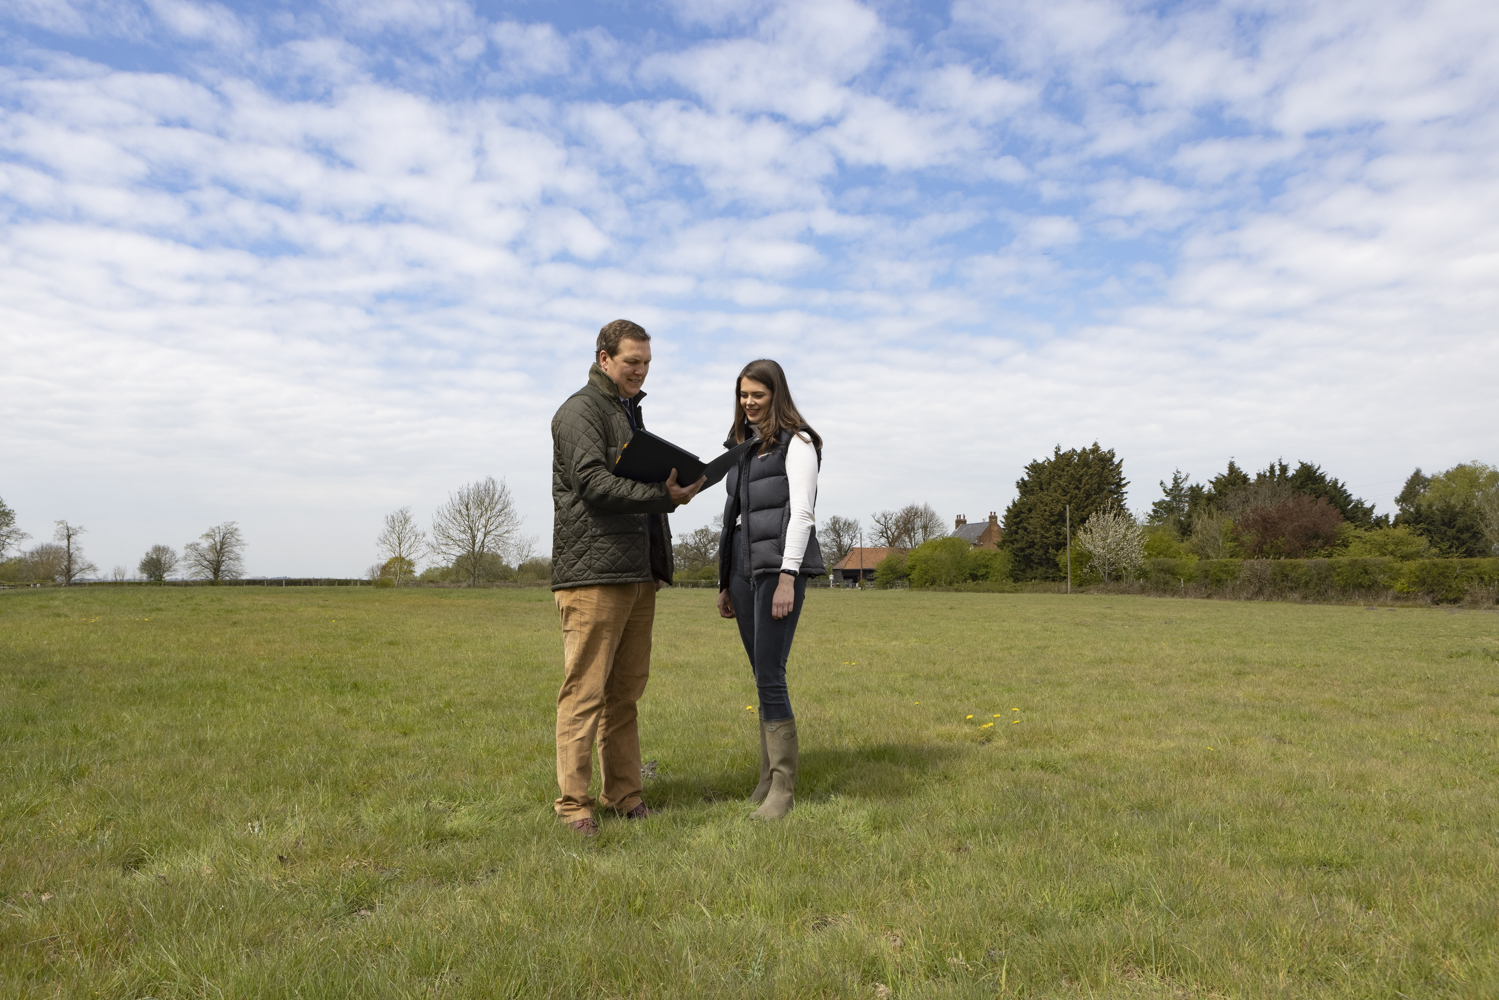 Find a partner to help manage my land in sustainable way